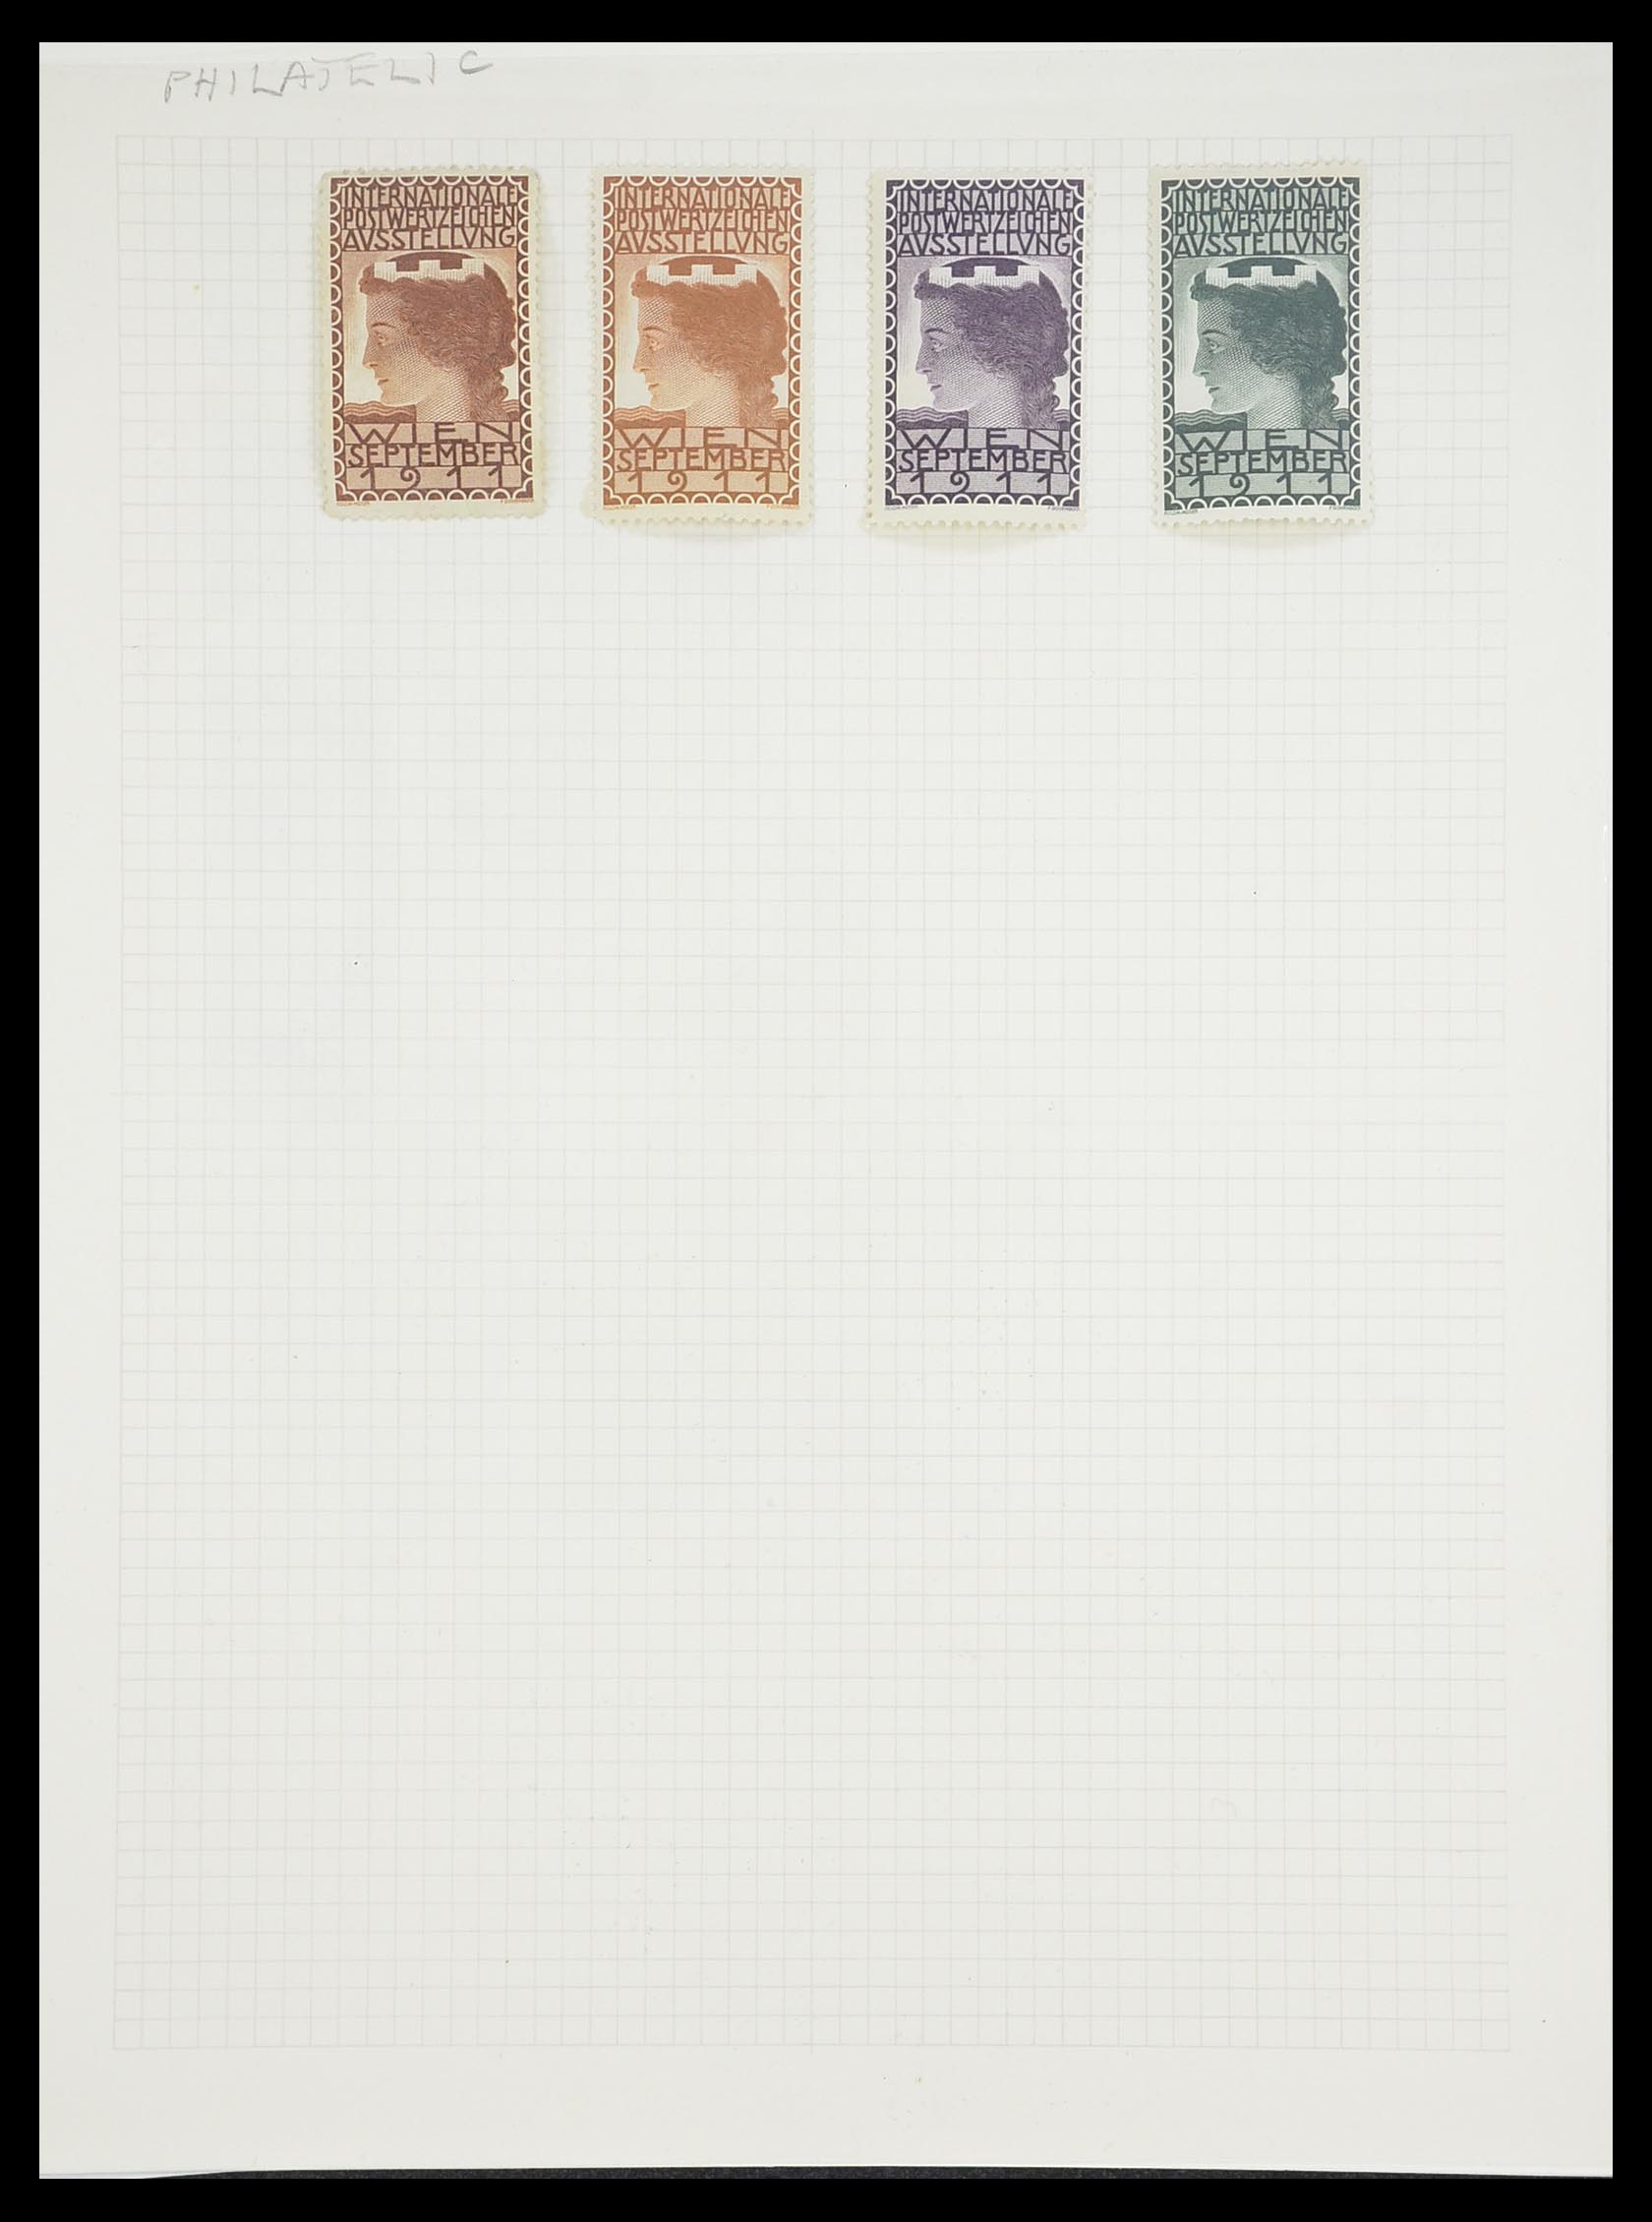 33451 490 - Stamp collection 33451 European countries 1850-1990.